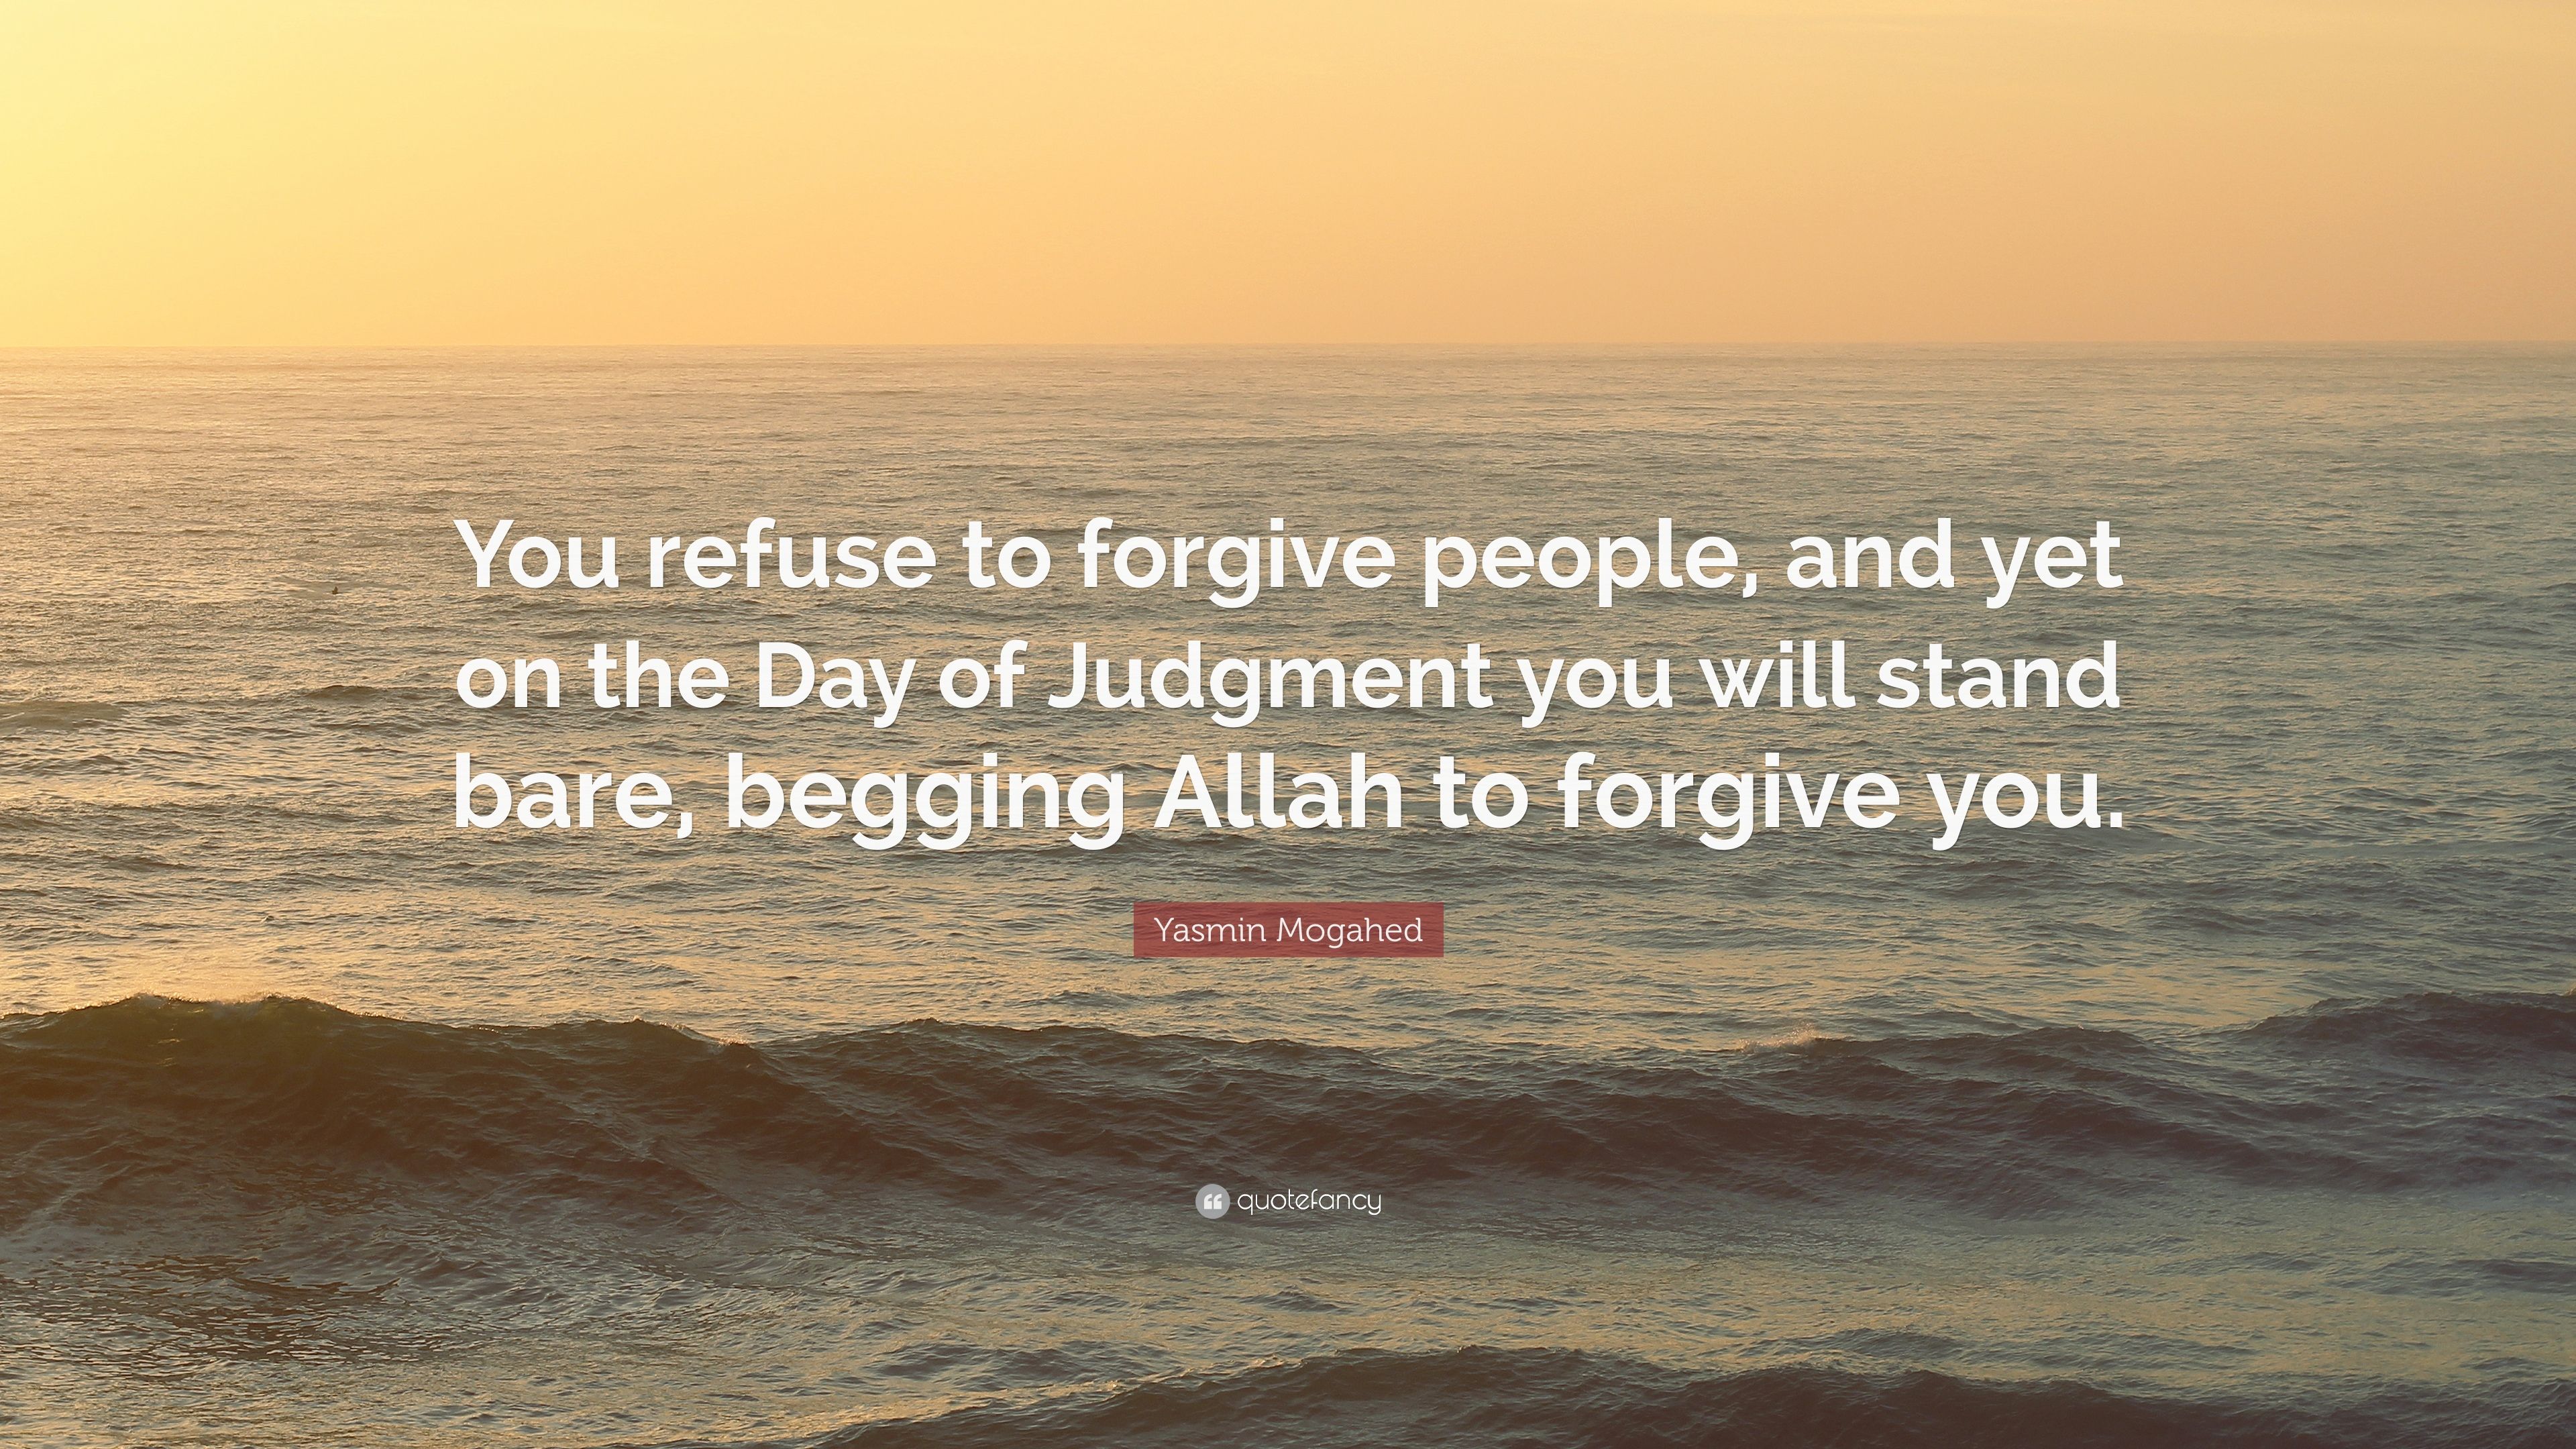 Yasmin Mogahed Quote: “You refuse to forgive people, and yet